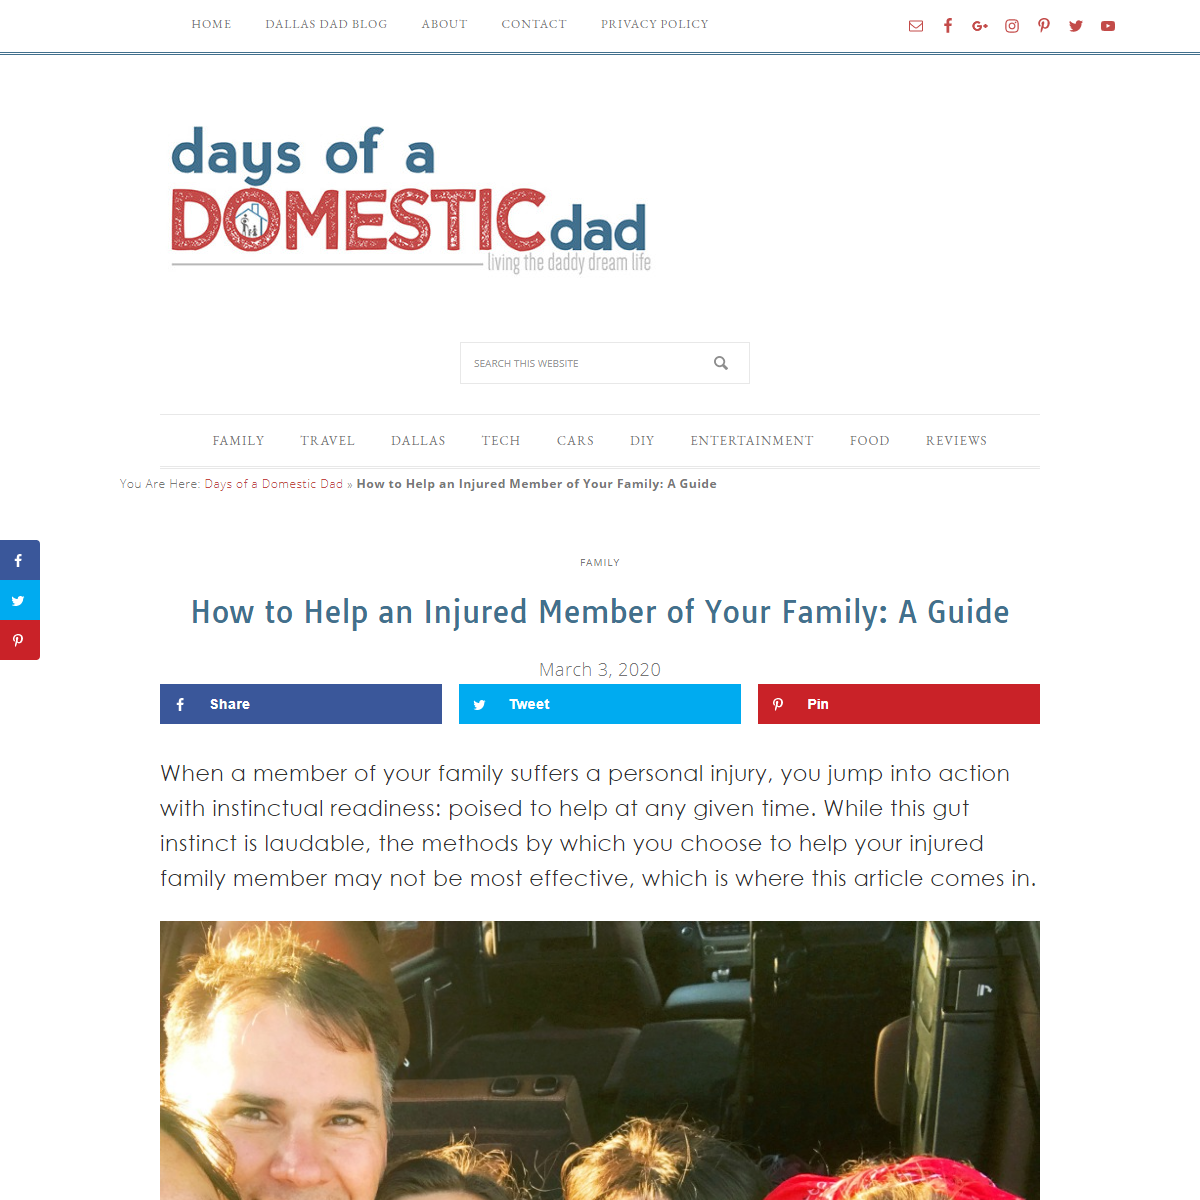 A complete backup of https://daysofadomesticdad.com/how-to-help-an-injured-member-of-your-family-a-guide/